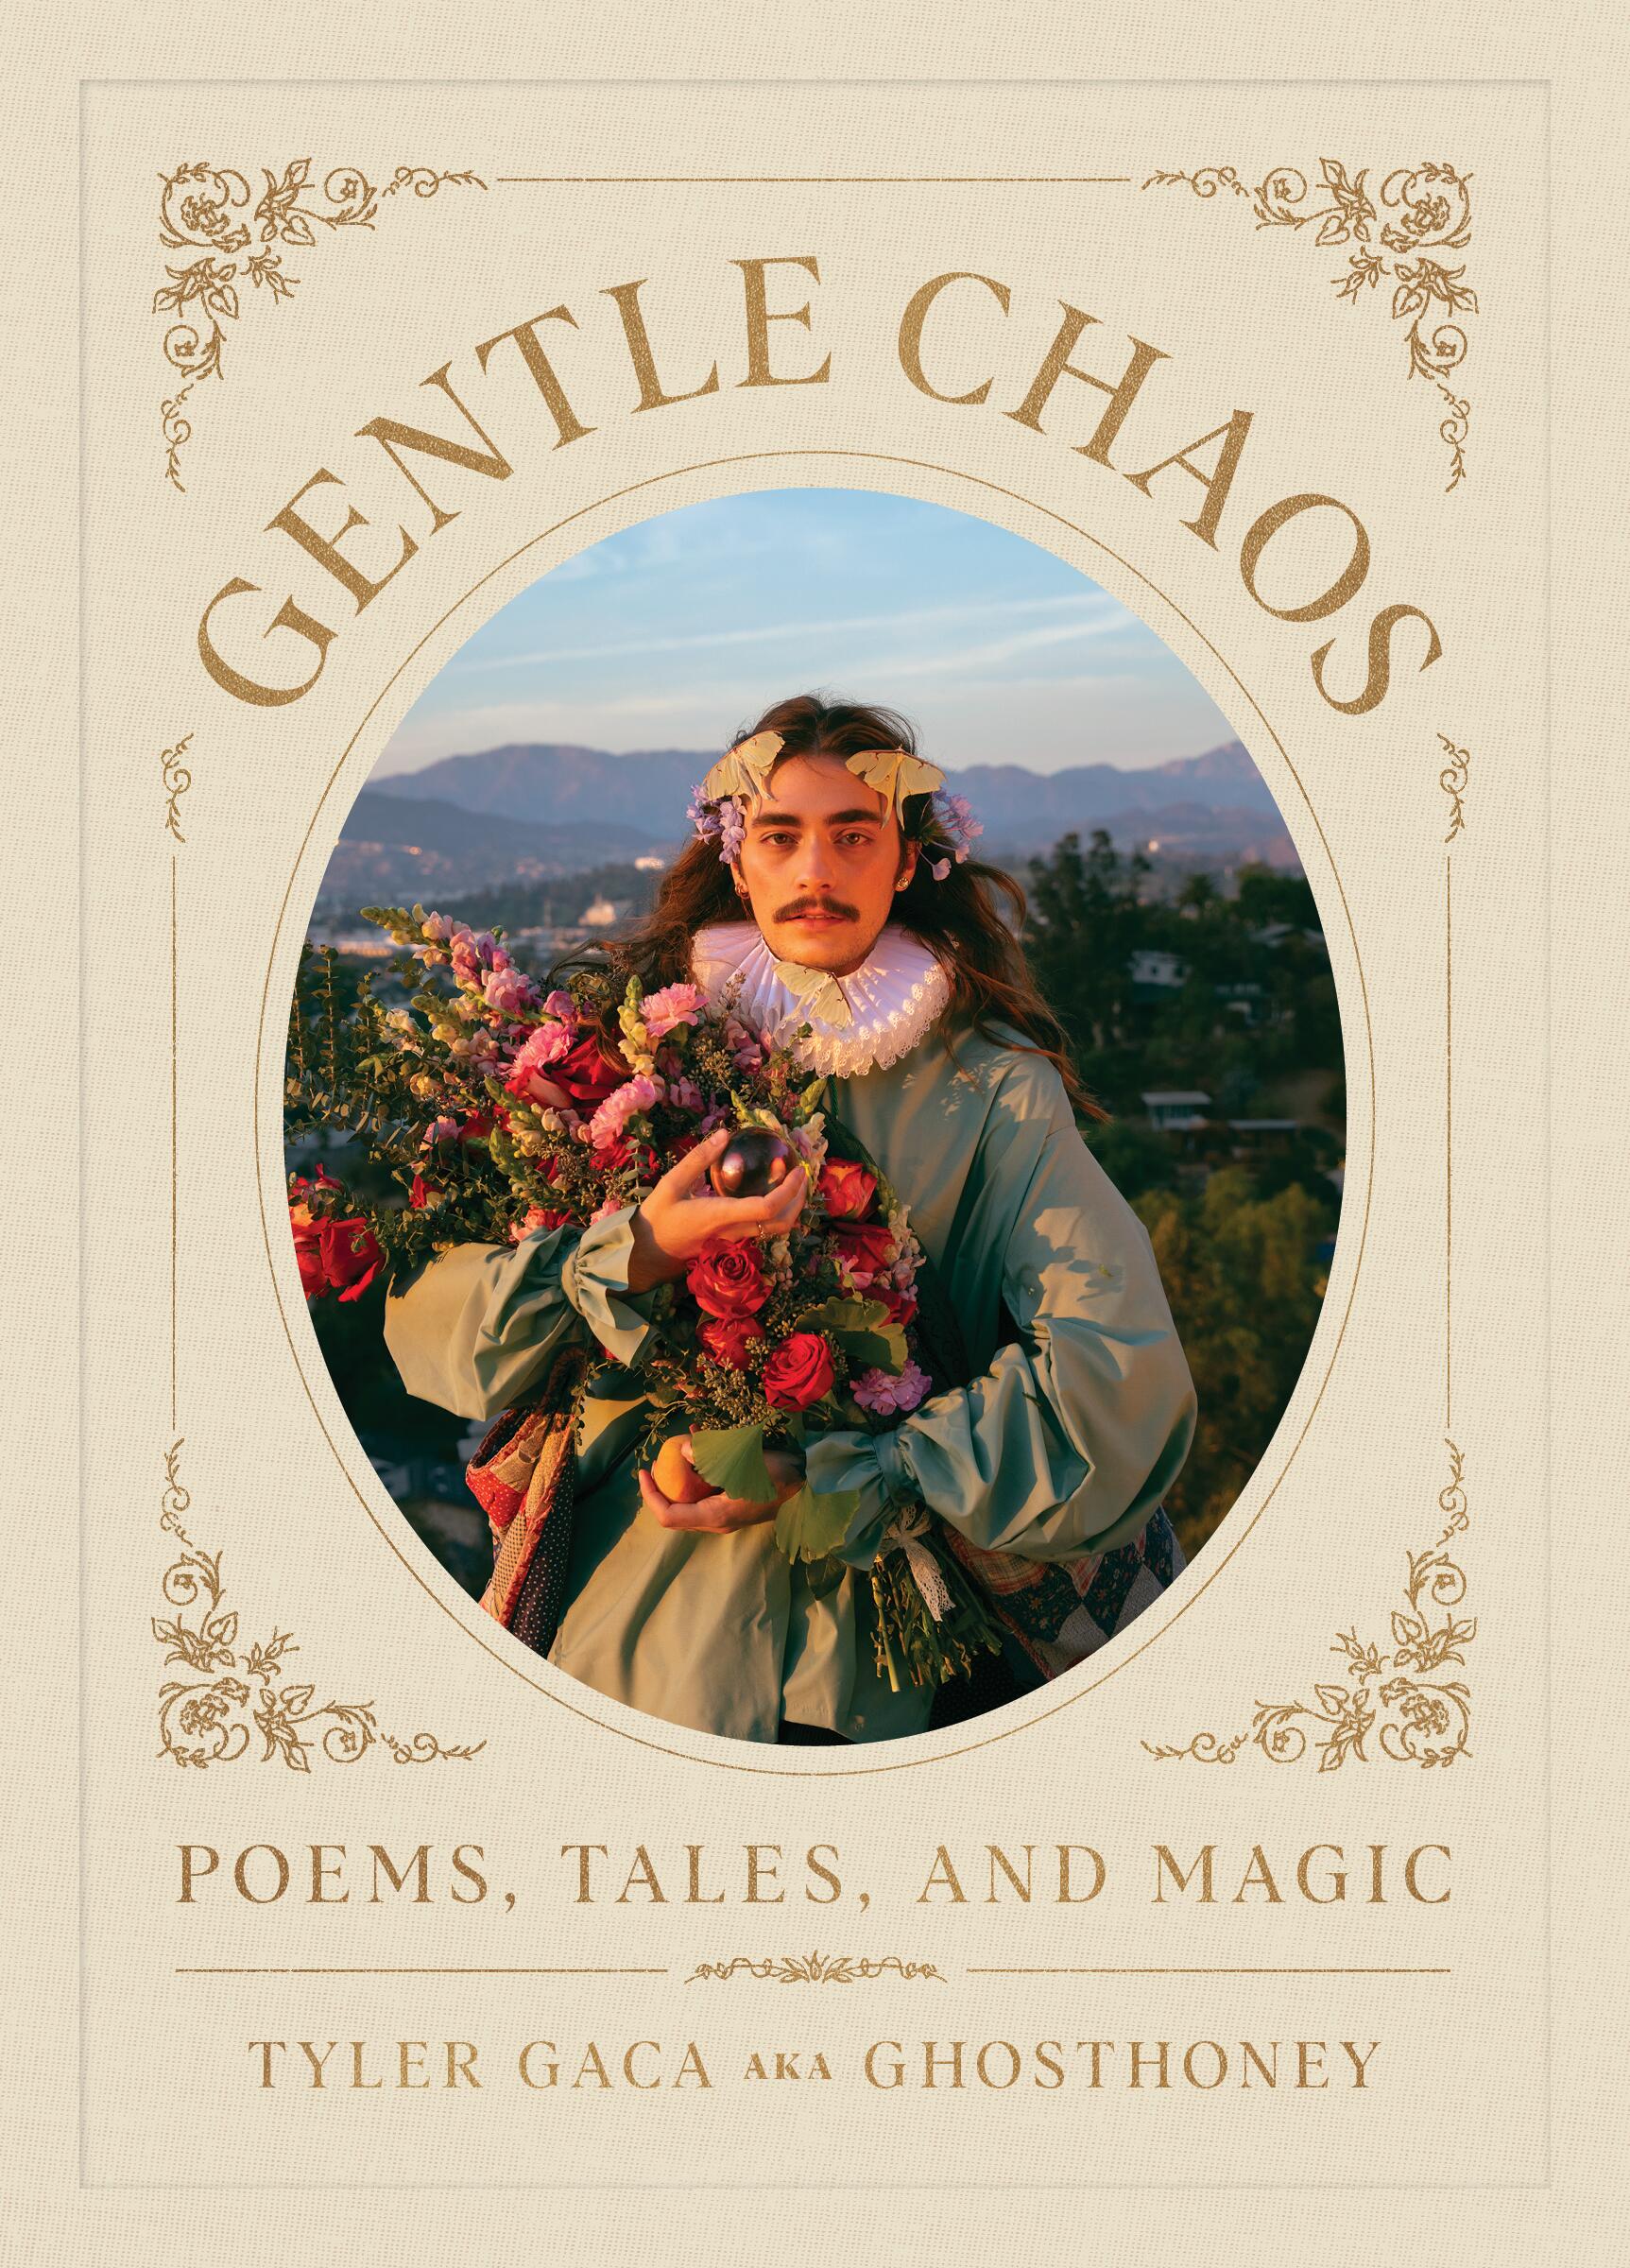 Gentle Chaos by Tyler Gaca | Hachette Book Group